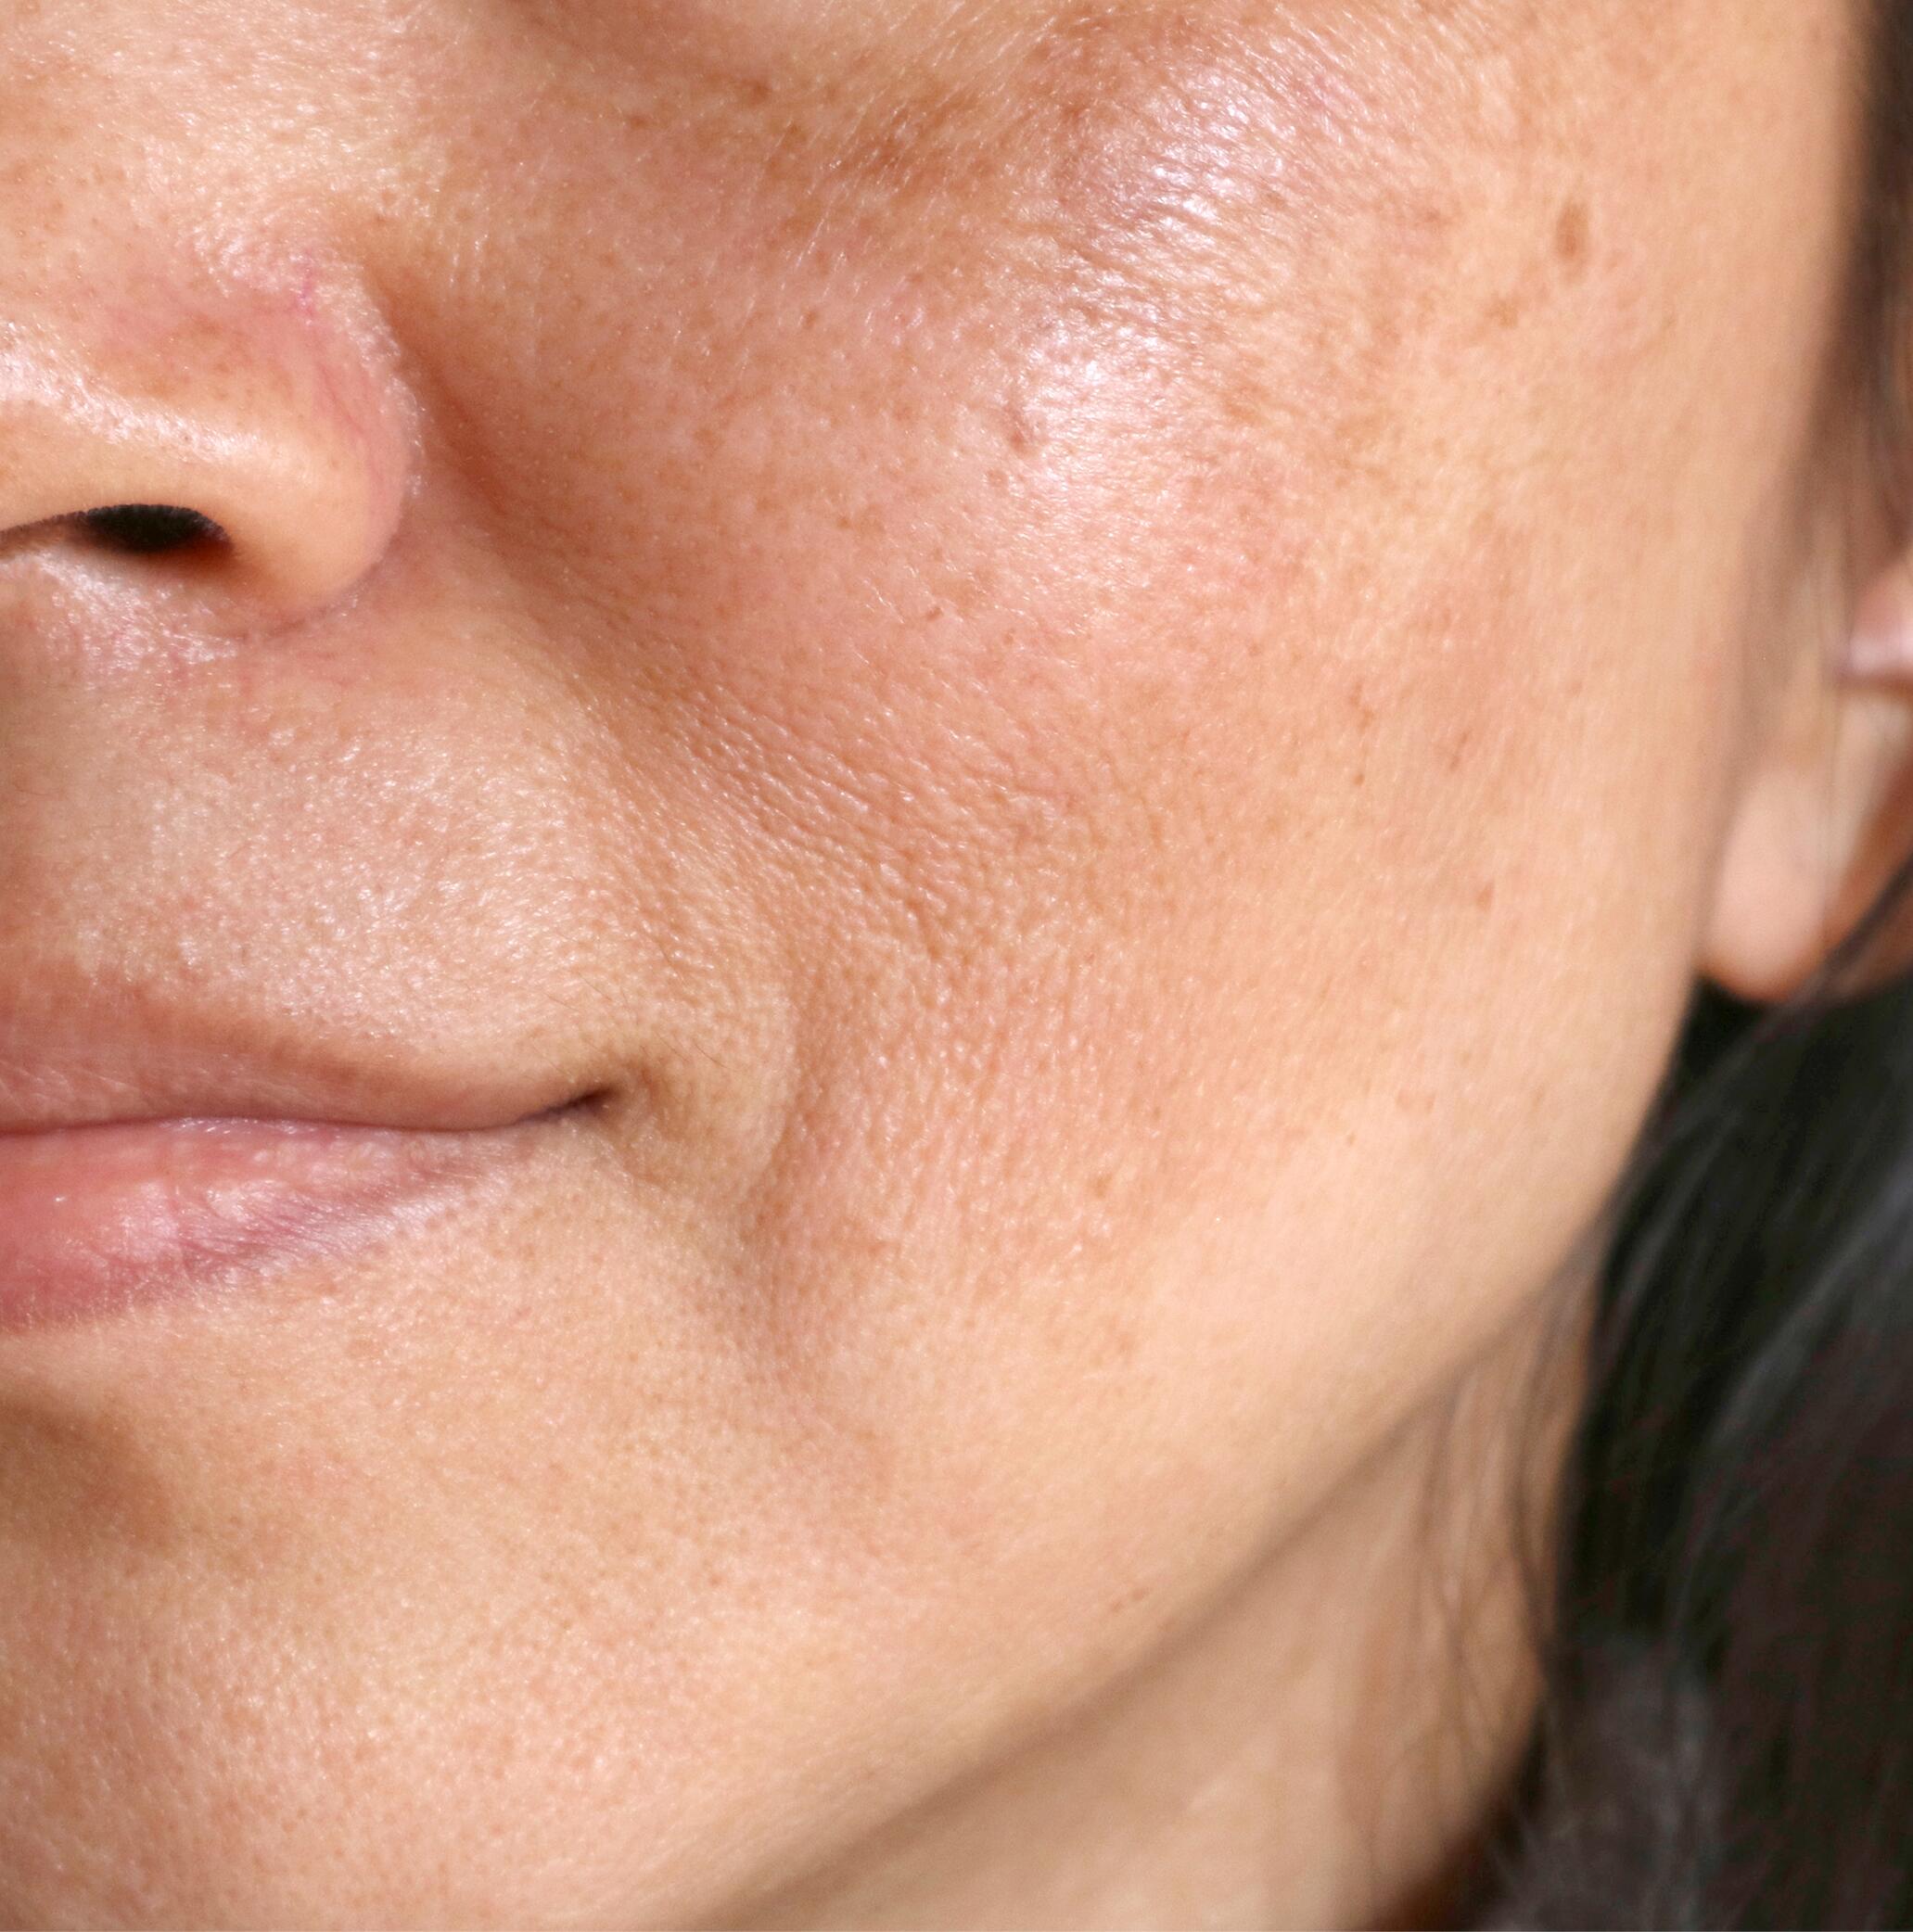 Sunspots on Face: Causes, Treatments, Prevention and Skin Cancer